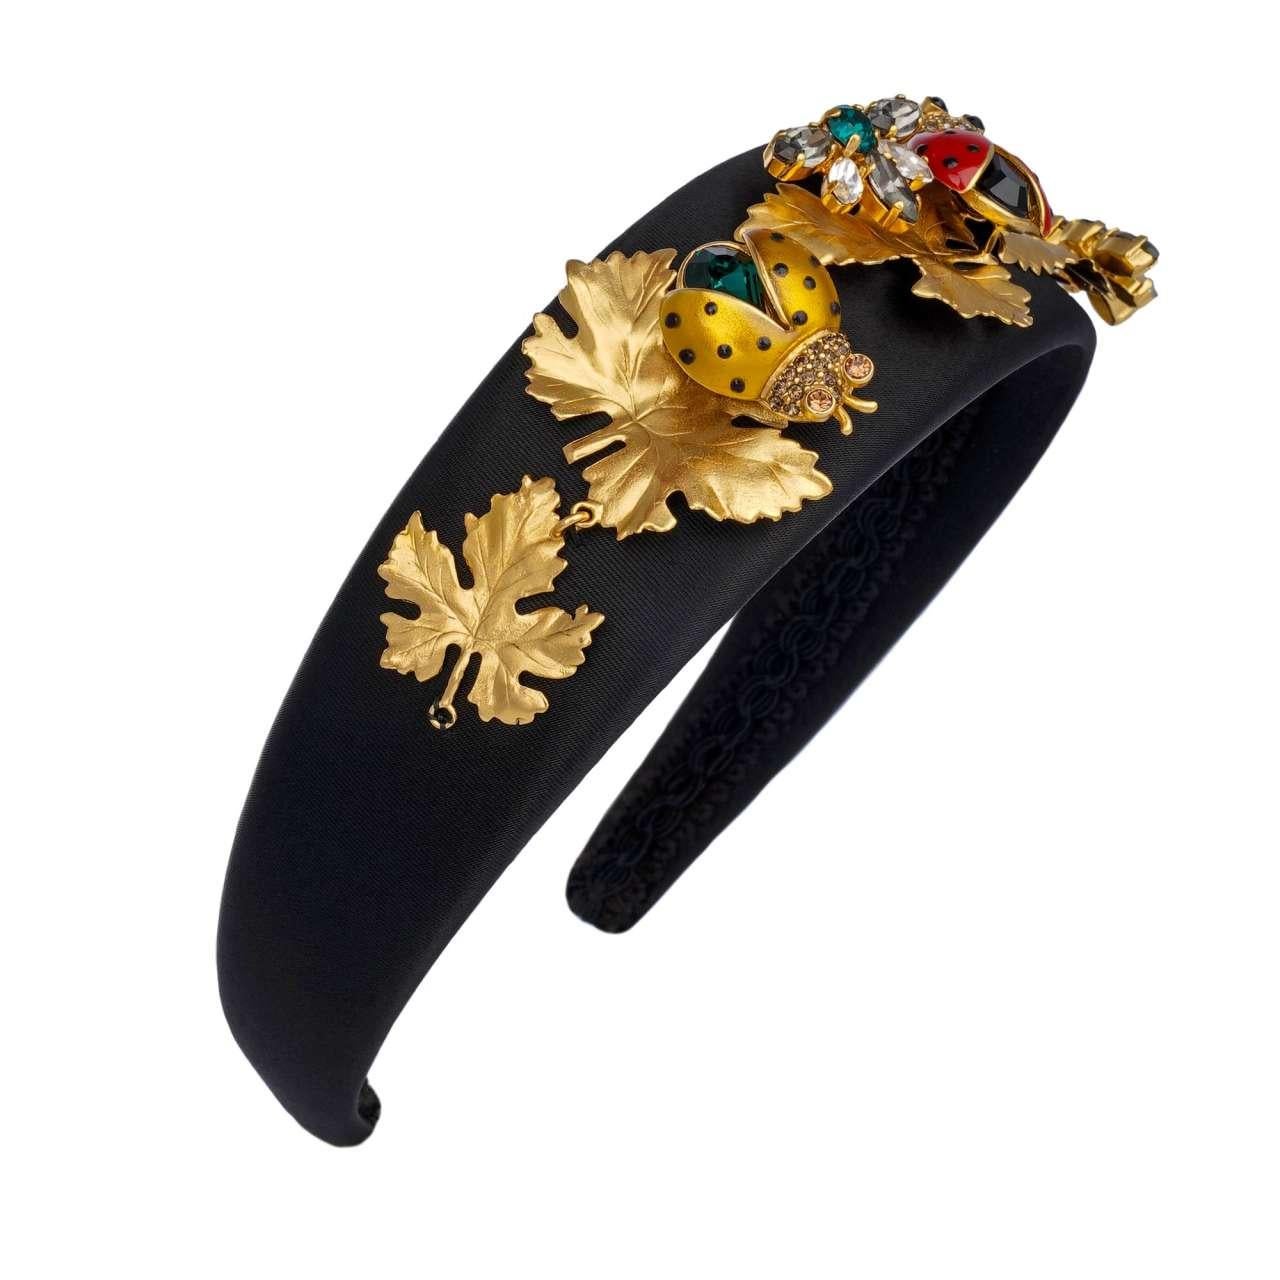 - Headband with crystals, leaves and ladybirds in black and gold by DOLCE & GABBANA - Former RRP: EUR 1.150 - RUNWAY - Dolce&Gabbana Fashion Show - MADE IN ITALY - New with Missing element, Box - Composition: 40% Brass, 40% Polyamid, 20% Crystals -